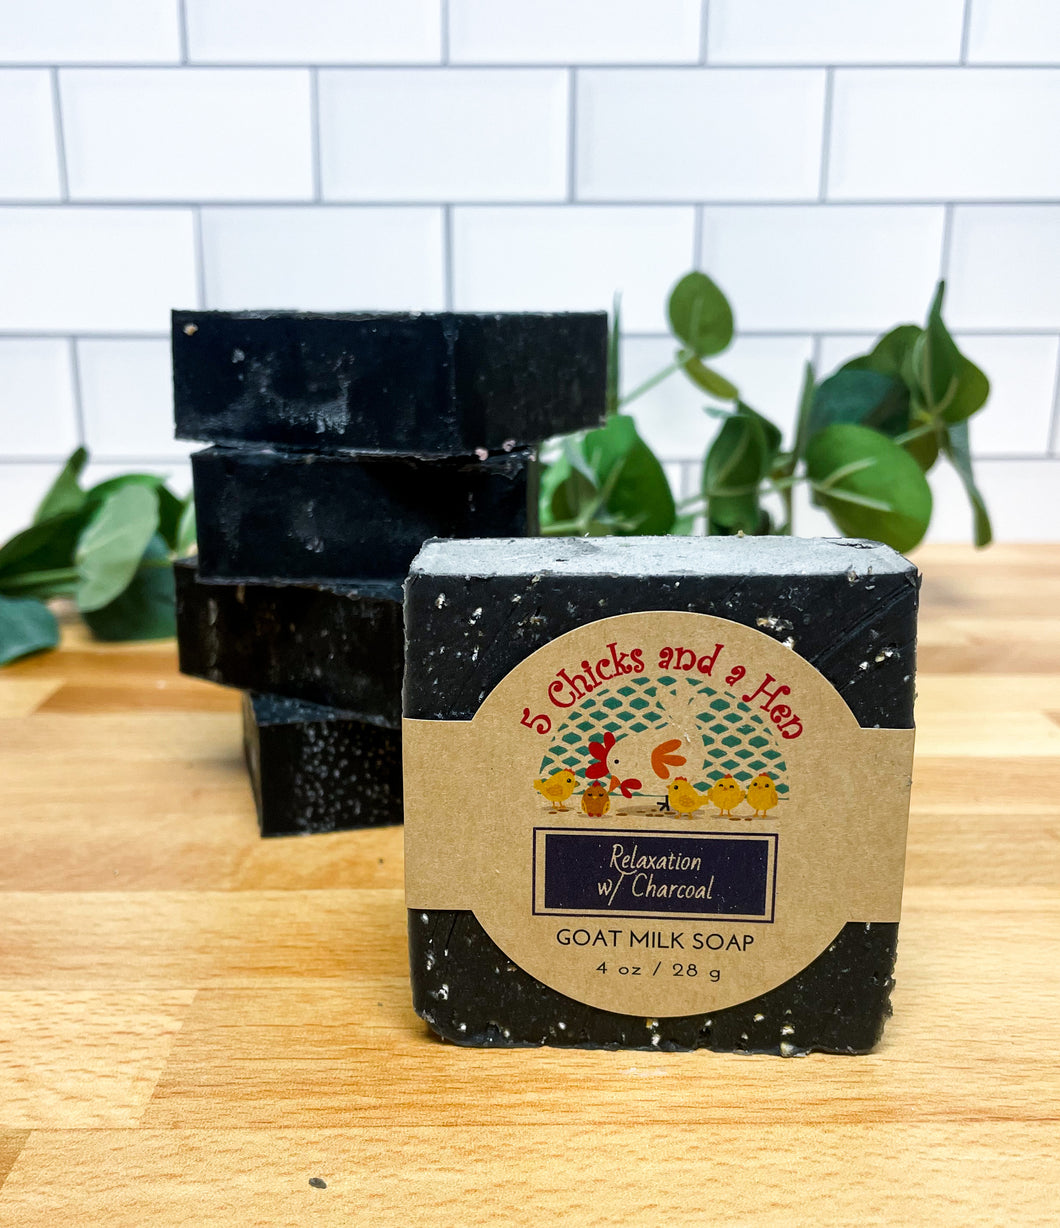 Relaxation WITH ACTIVATED CHARCOAL Handcrafted Goat Milk Bar Soap